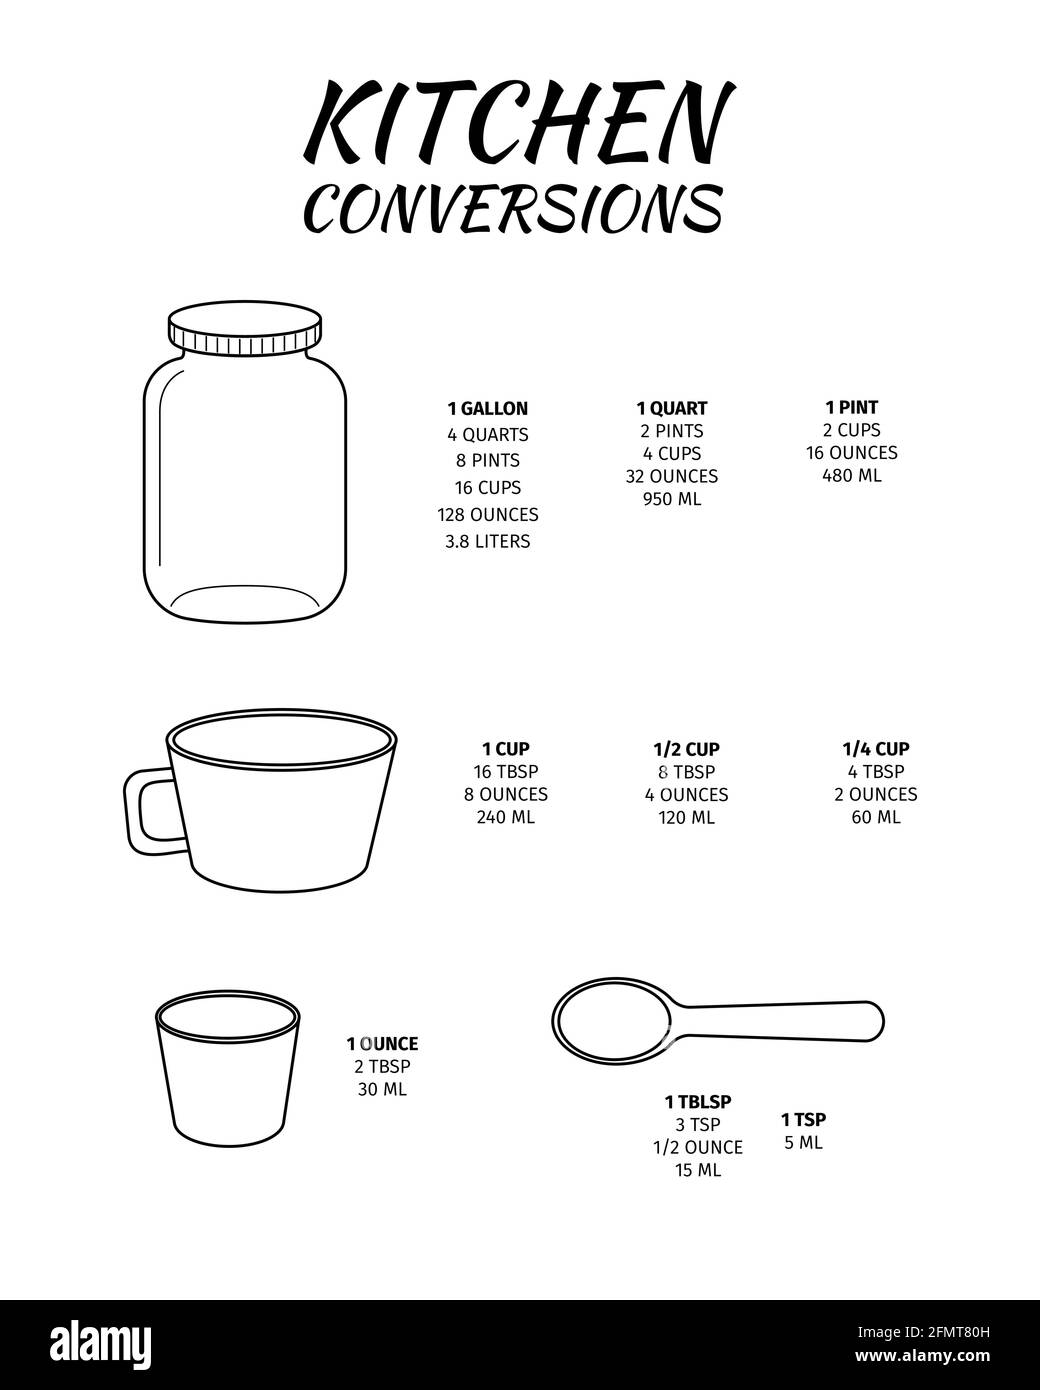 https://c8.alamy.com/comp/2FMT80H/kitchen-conversions-chart-with-jar-cup-ounce-glass-spoon-basic-metric-units-of-cooking-measurements-most-commonly-used-volume-measures-weight-of-liquids-vector-outline-illustration-2FMT80H.jpg